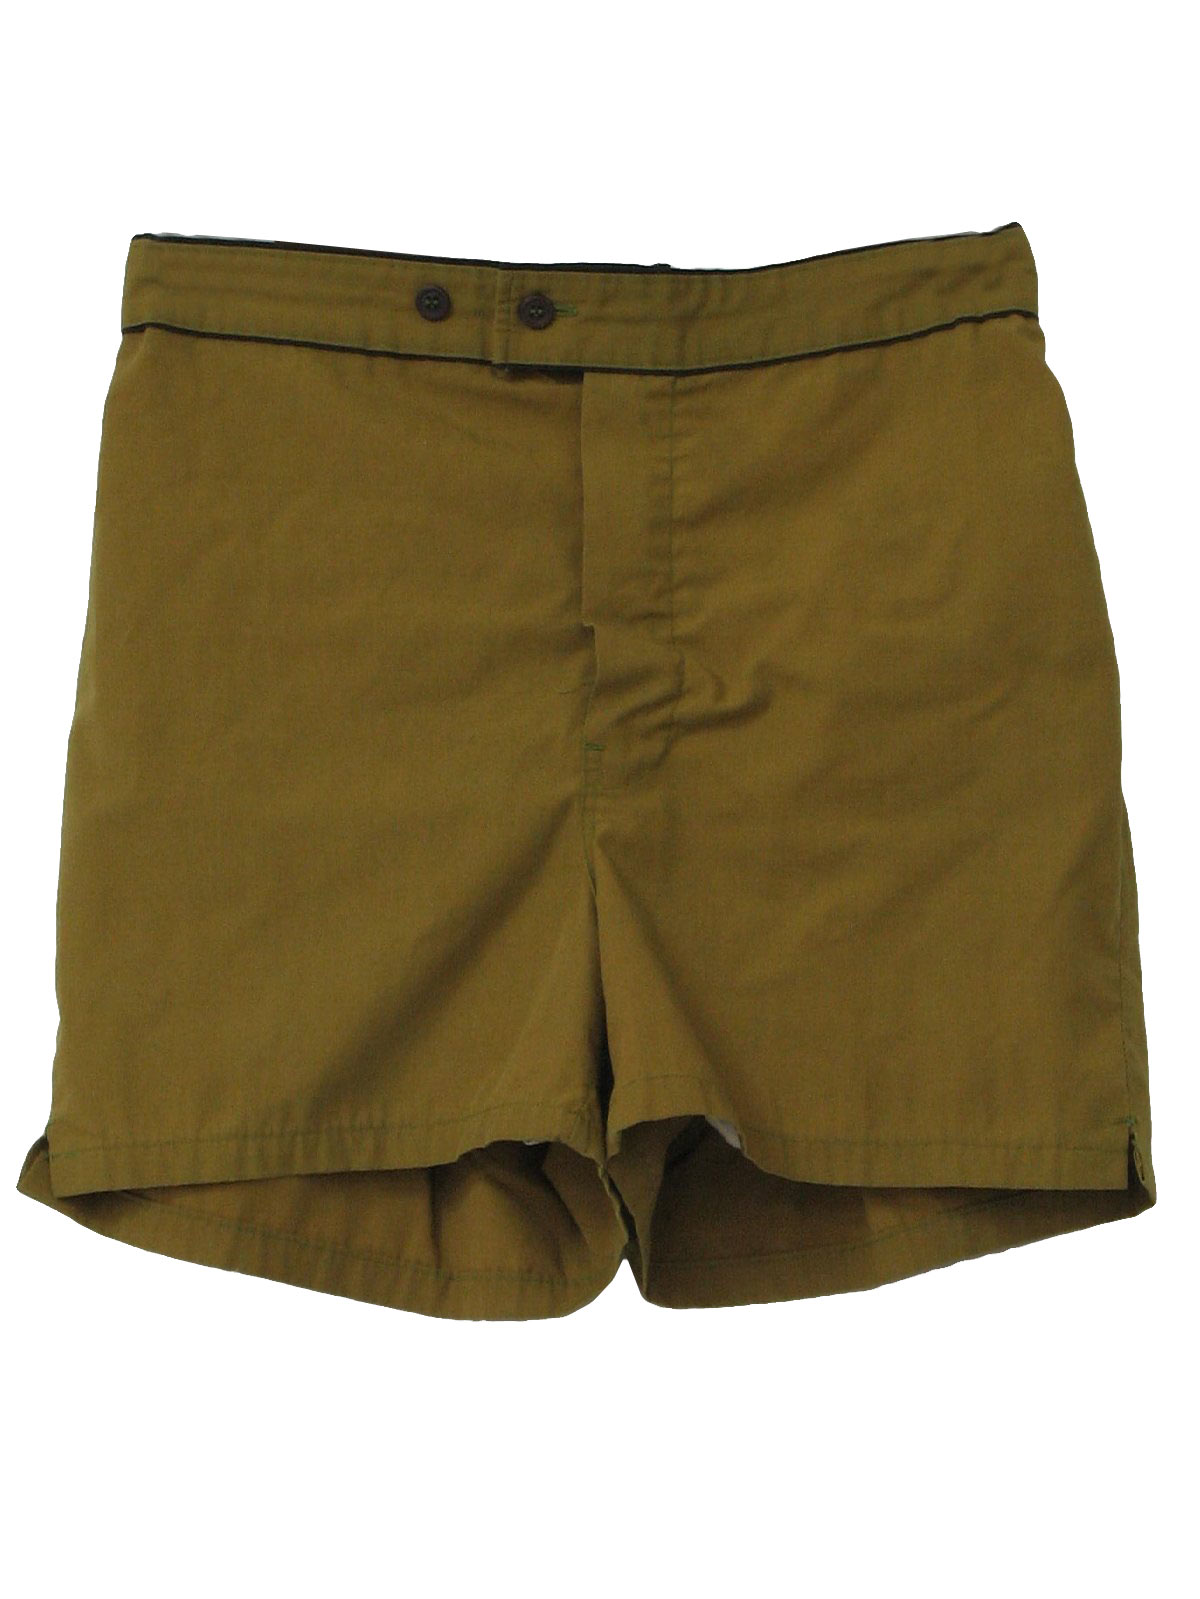 Vintage 60s Shorts: Late 60s or early 70s -Towncraft- Mens light olive ...